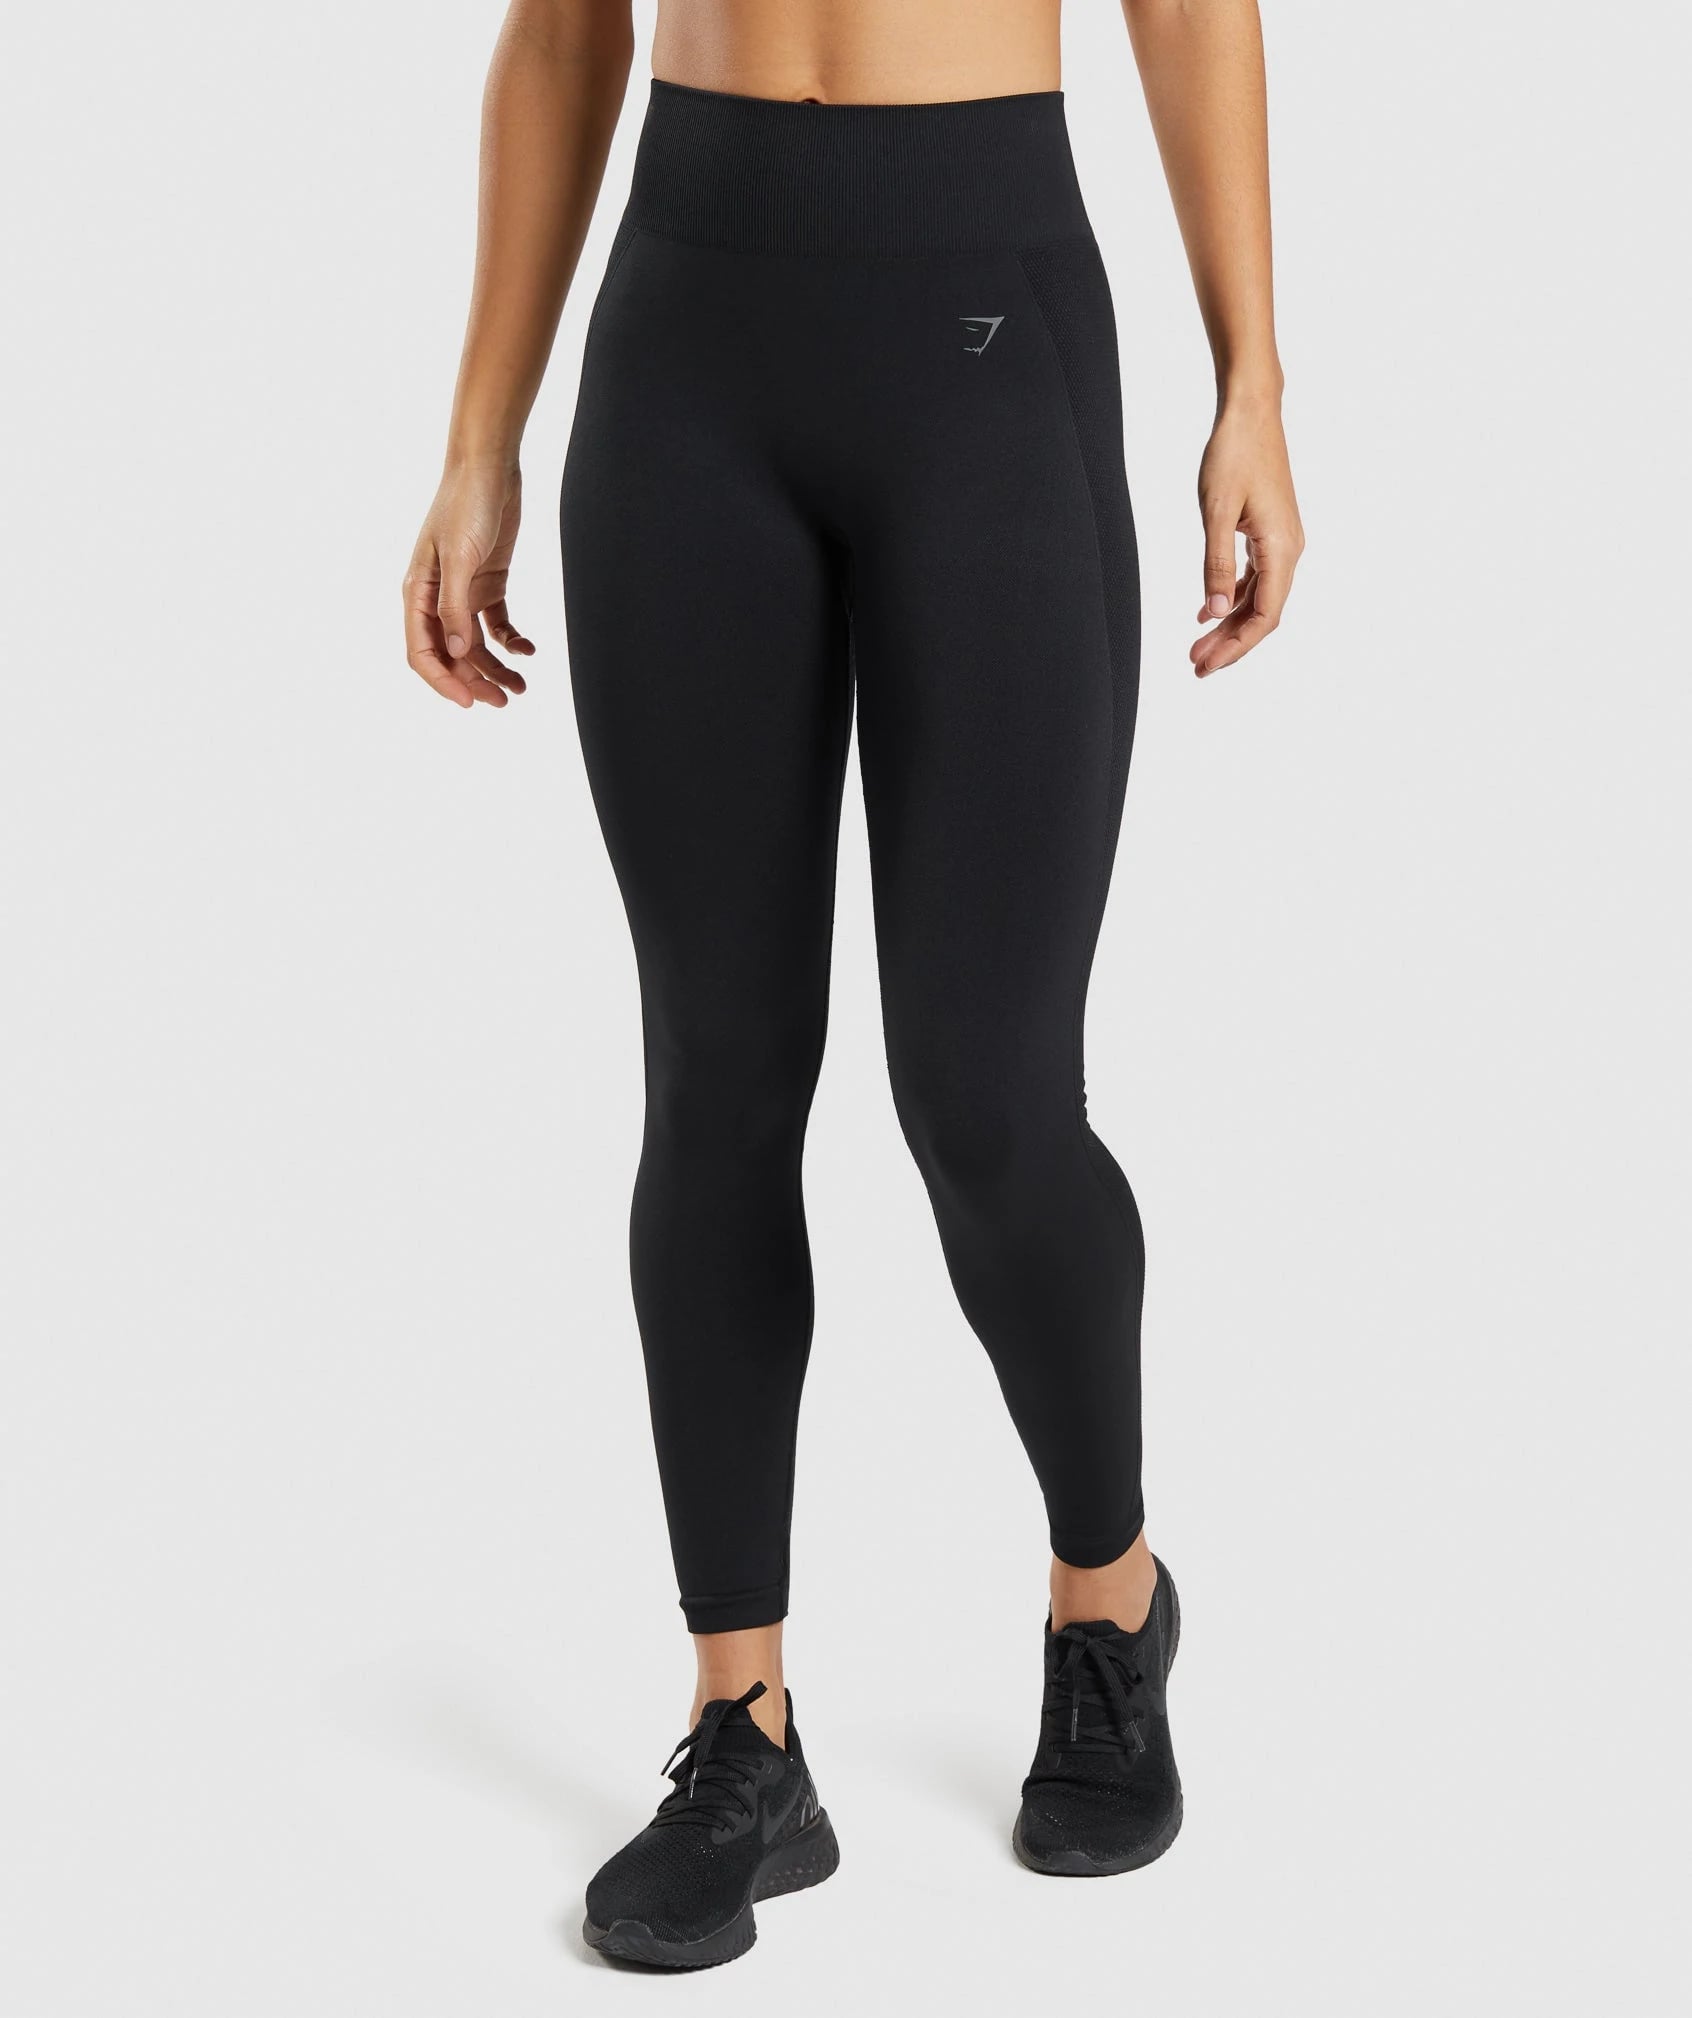 My gym shark leggings are seethrough. What can I do? - Quora